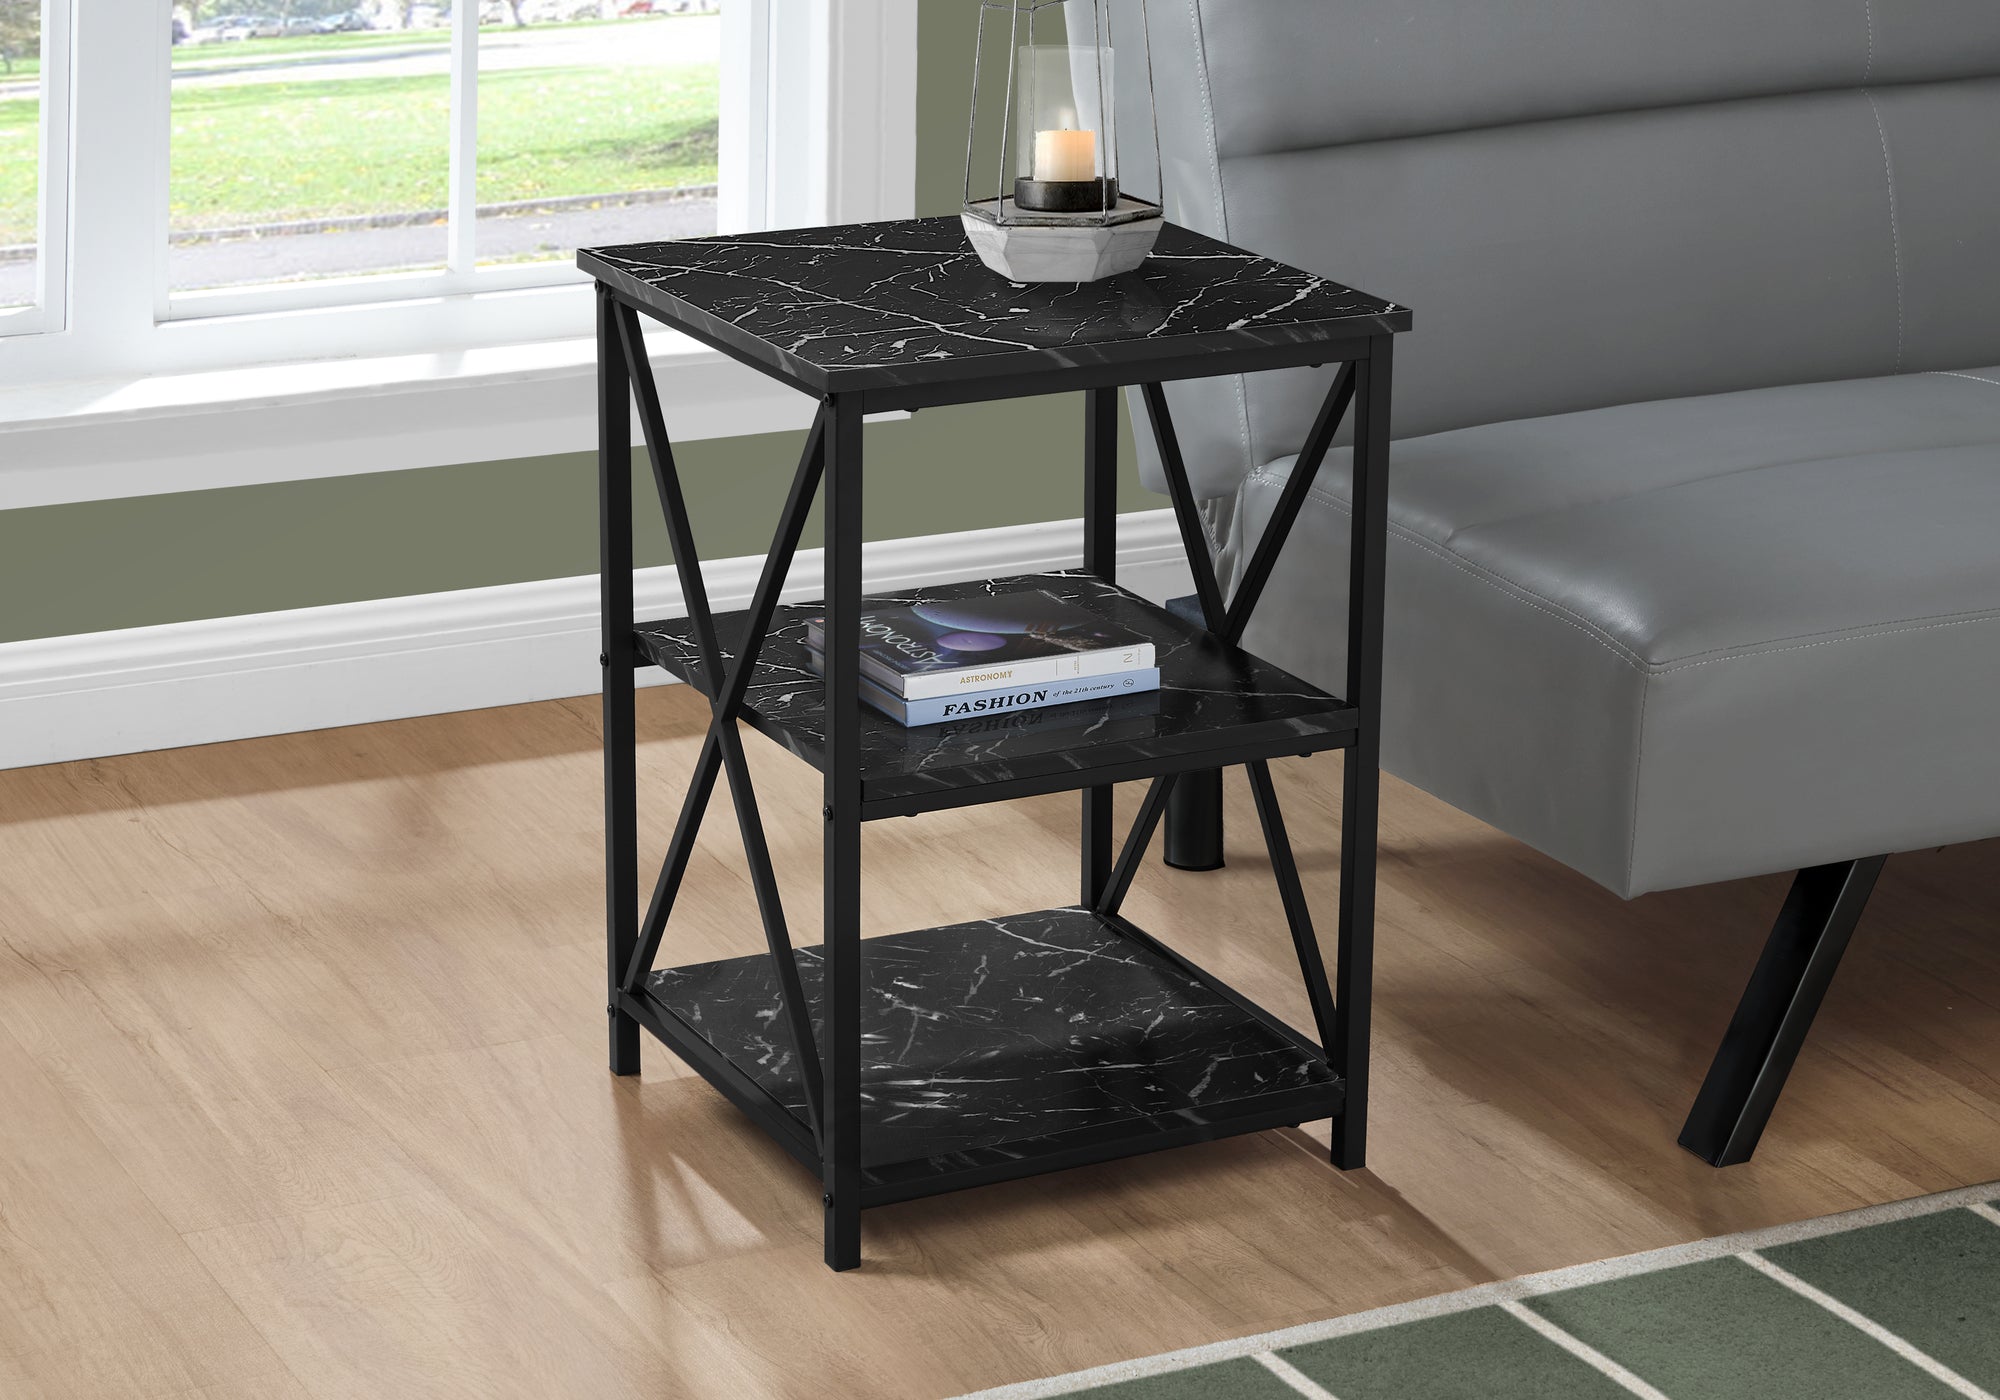 MN-533595    Accent Table, Side, End, Nightstand, Lamp, Living Room, Bedroom, Metal Legs, Laminate, Black Marble-Look, Contemporary, Glam, Modern